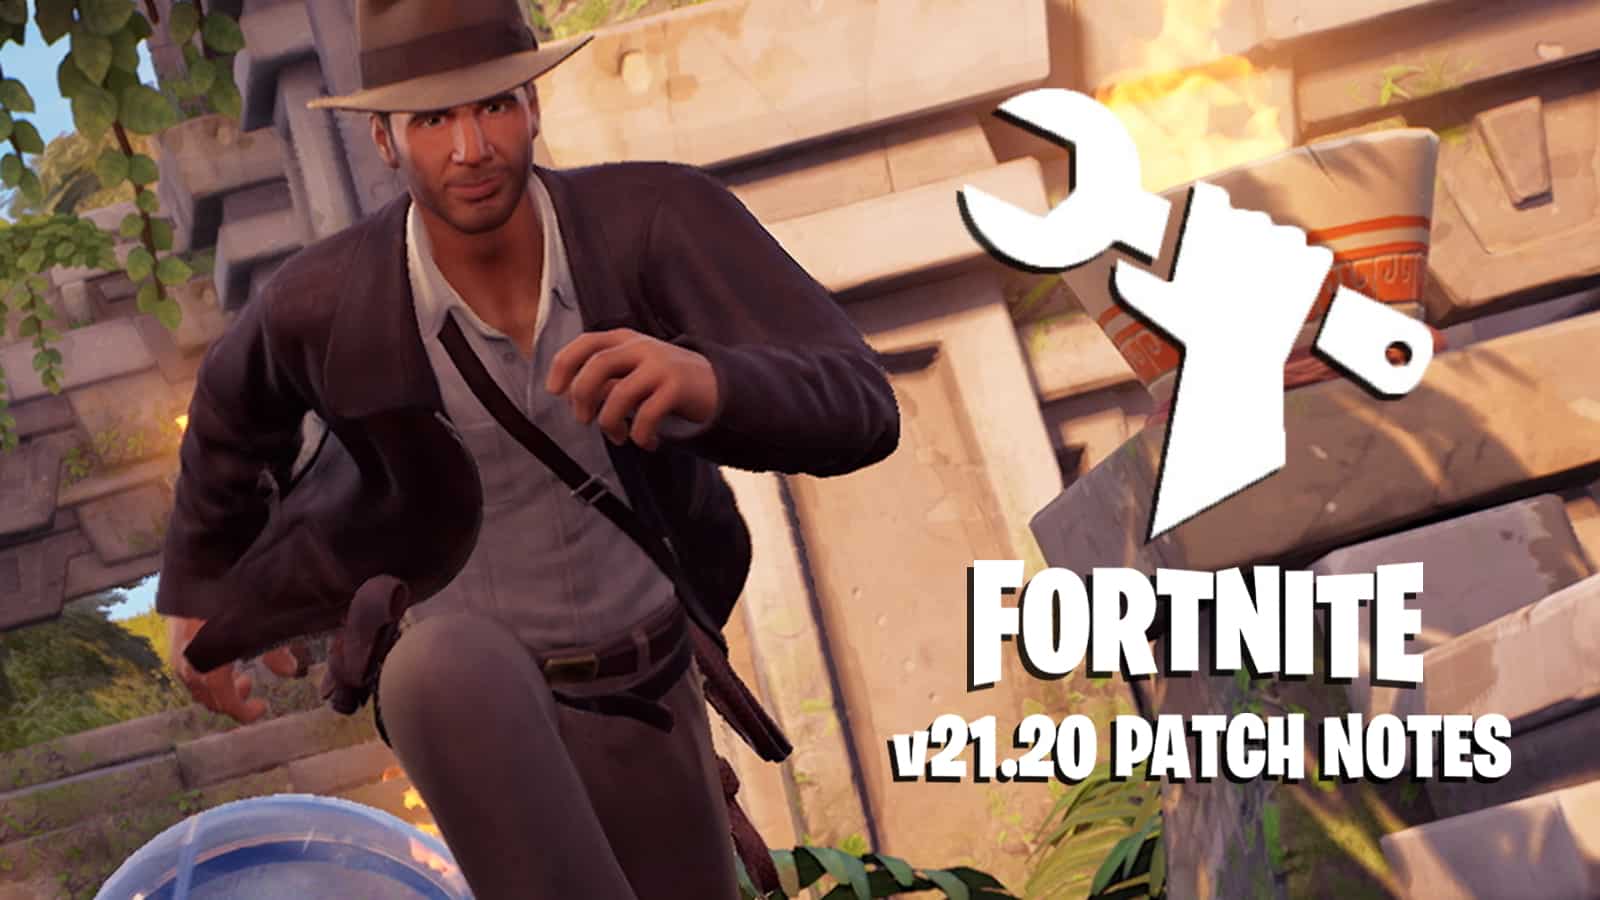 A poster for the Fortnite update 21.20 patch notes